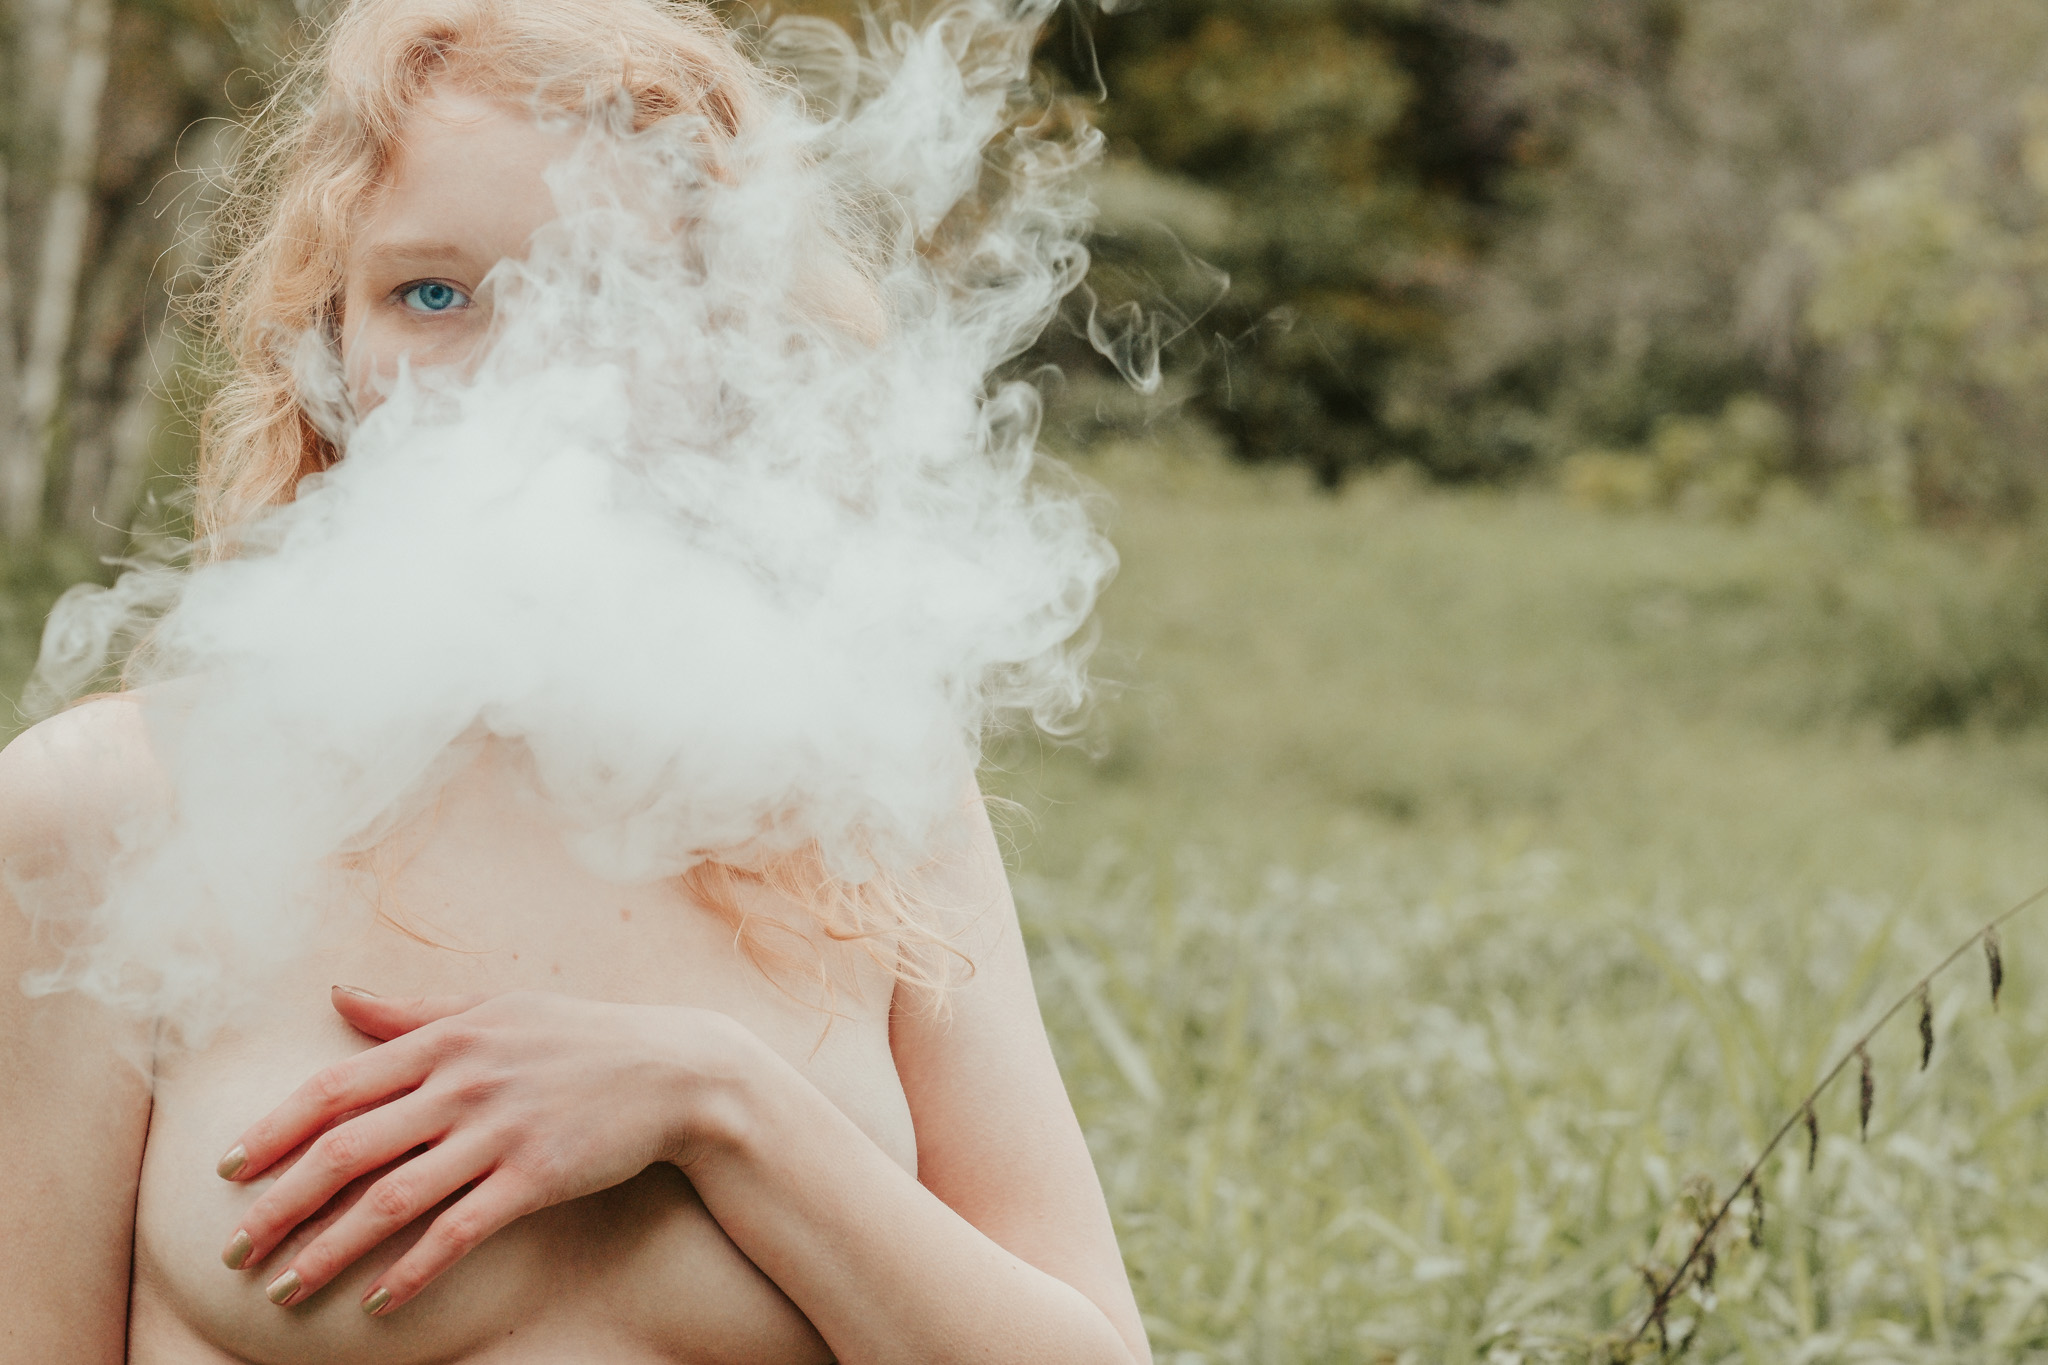 Blonde woman blowing smoke at camera while naked outside near trees